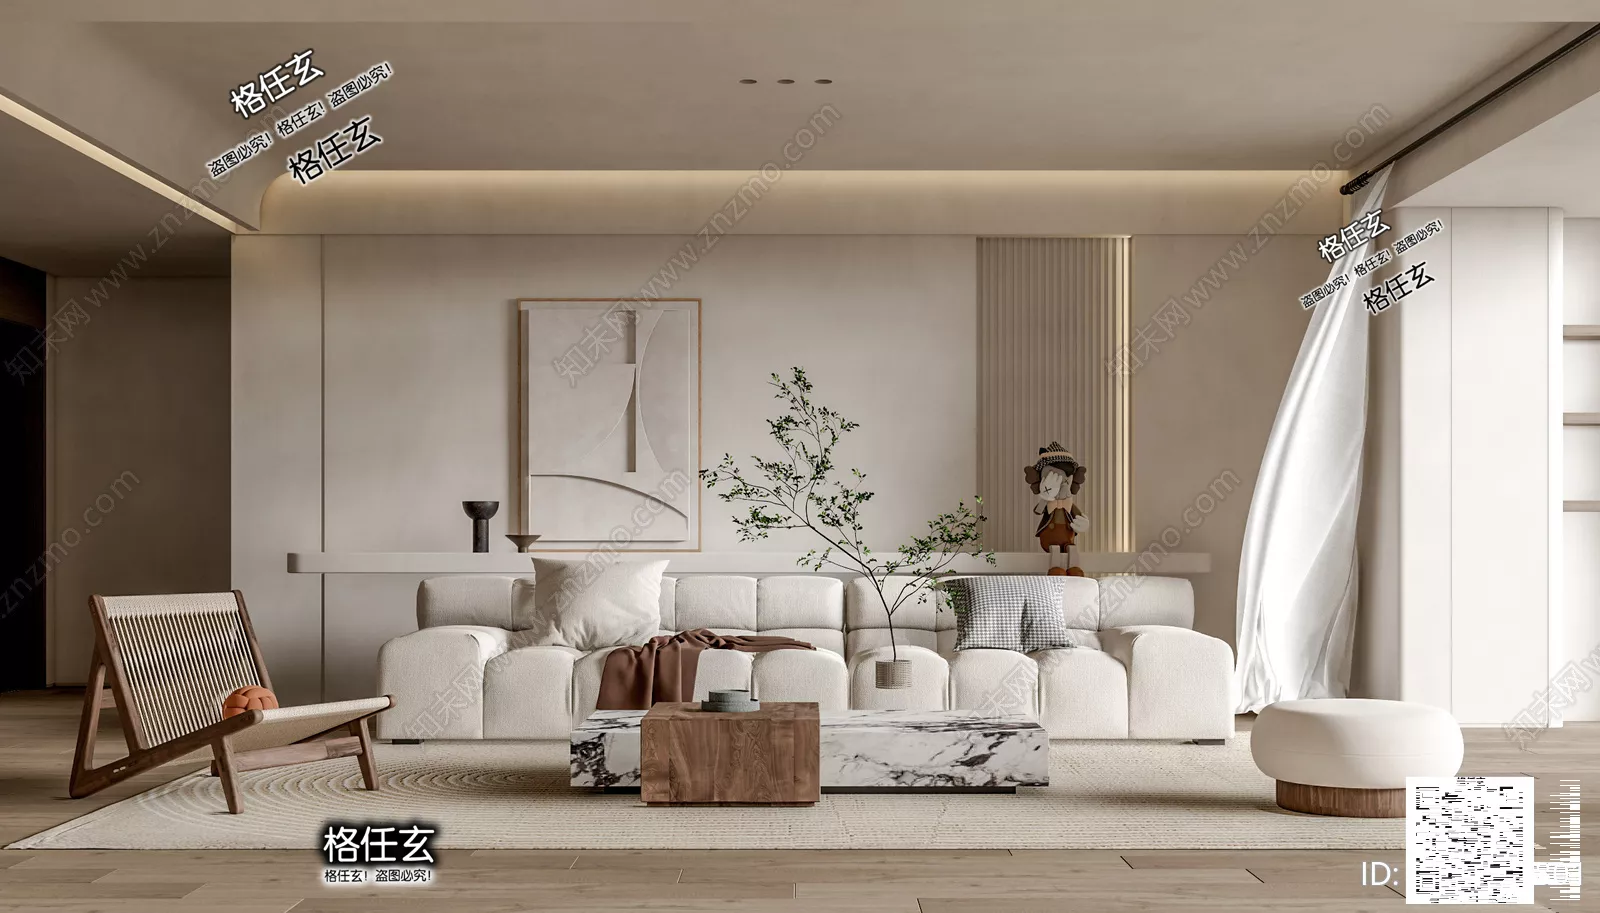 WABI SABI INTERIOR COLLECTION - SKETCHUP 3D SCENE - VRAY OR ENSCAPE - ID17760